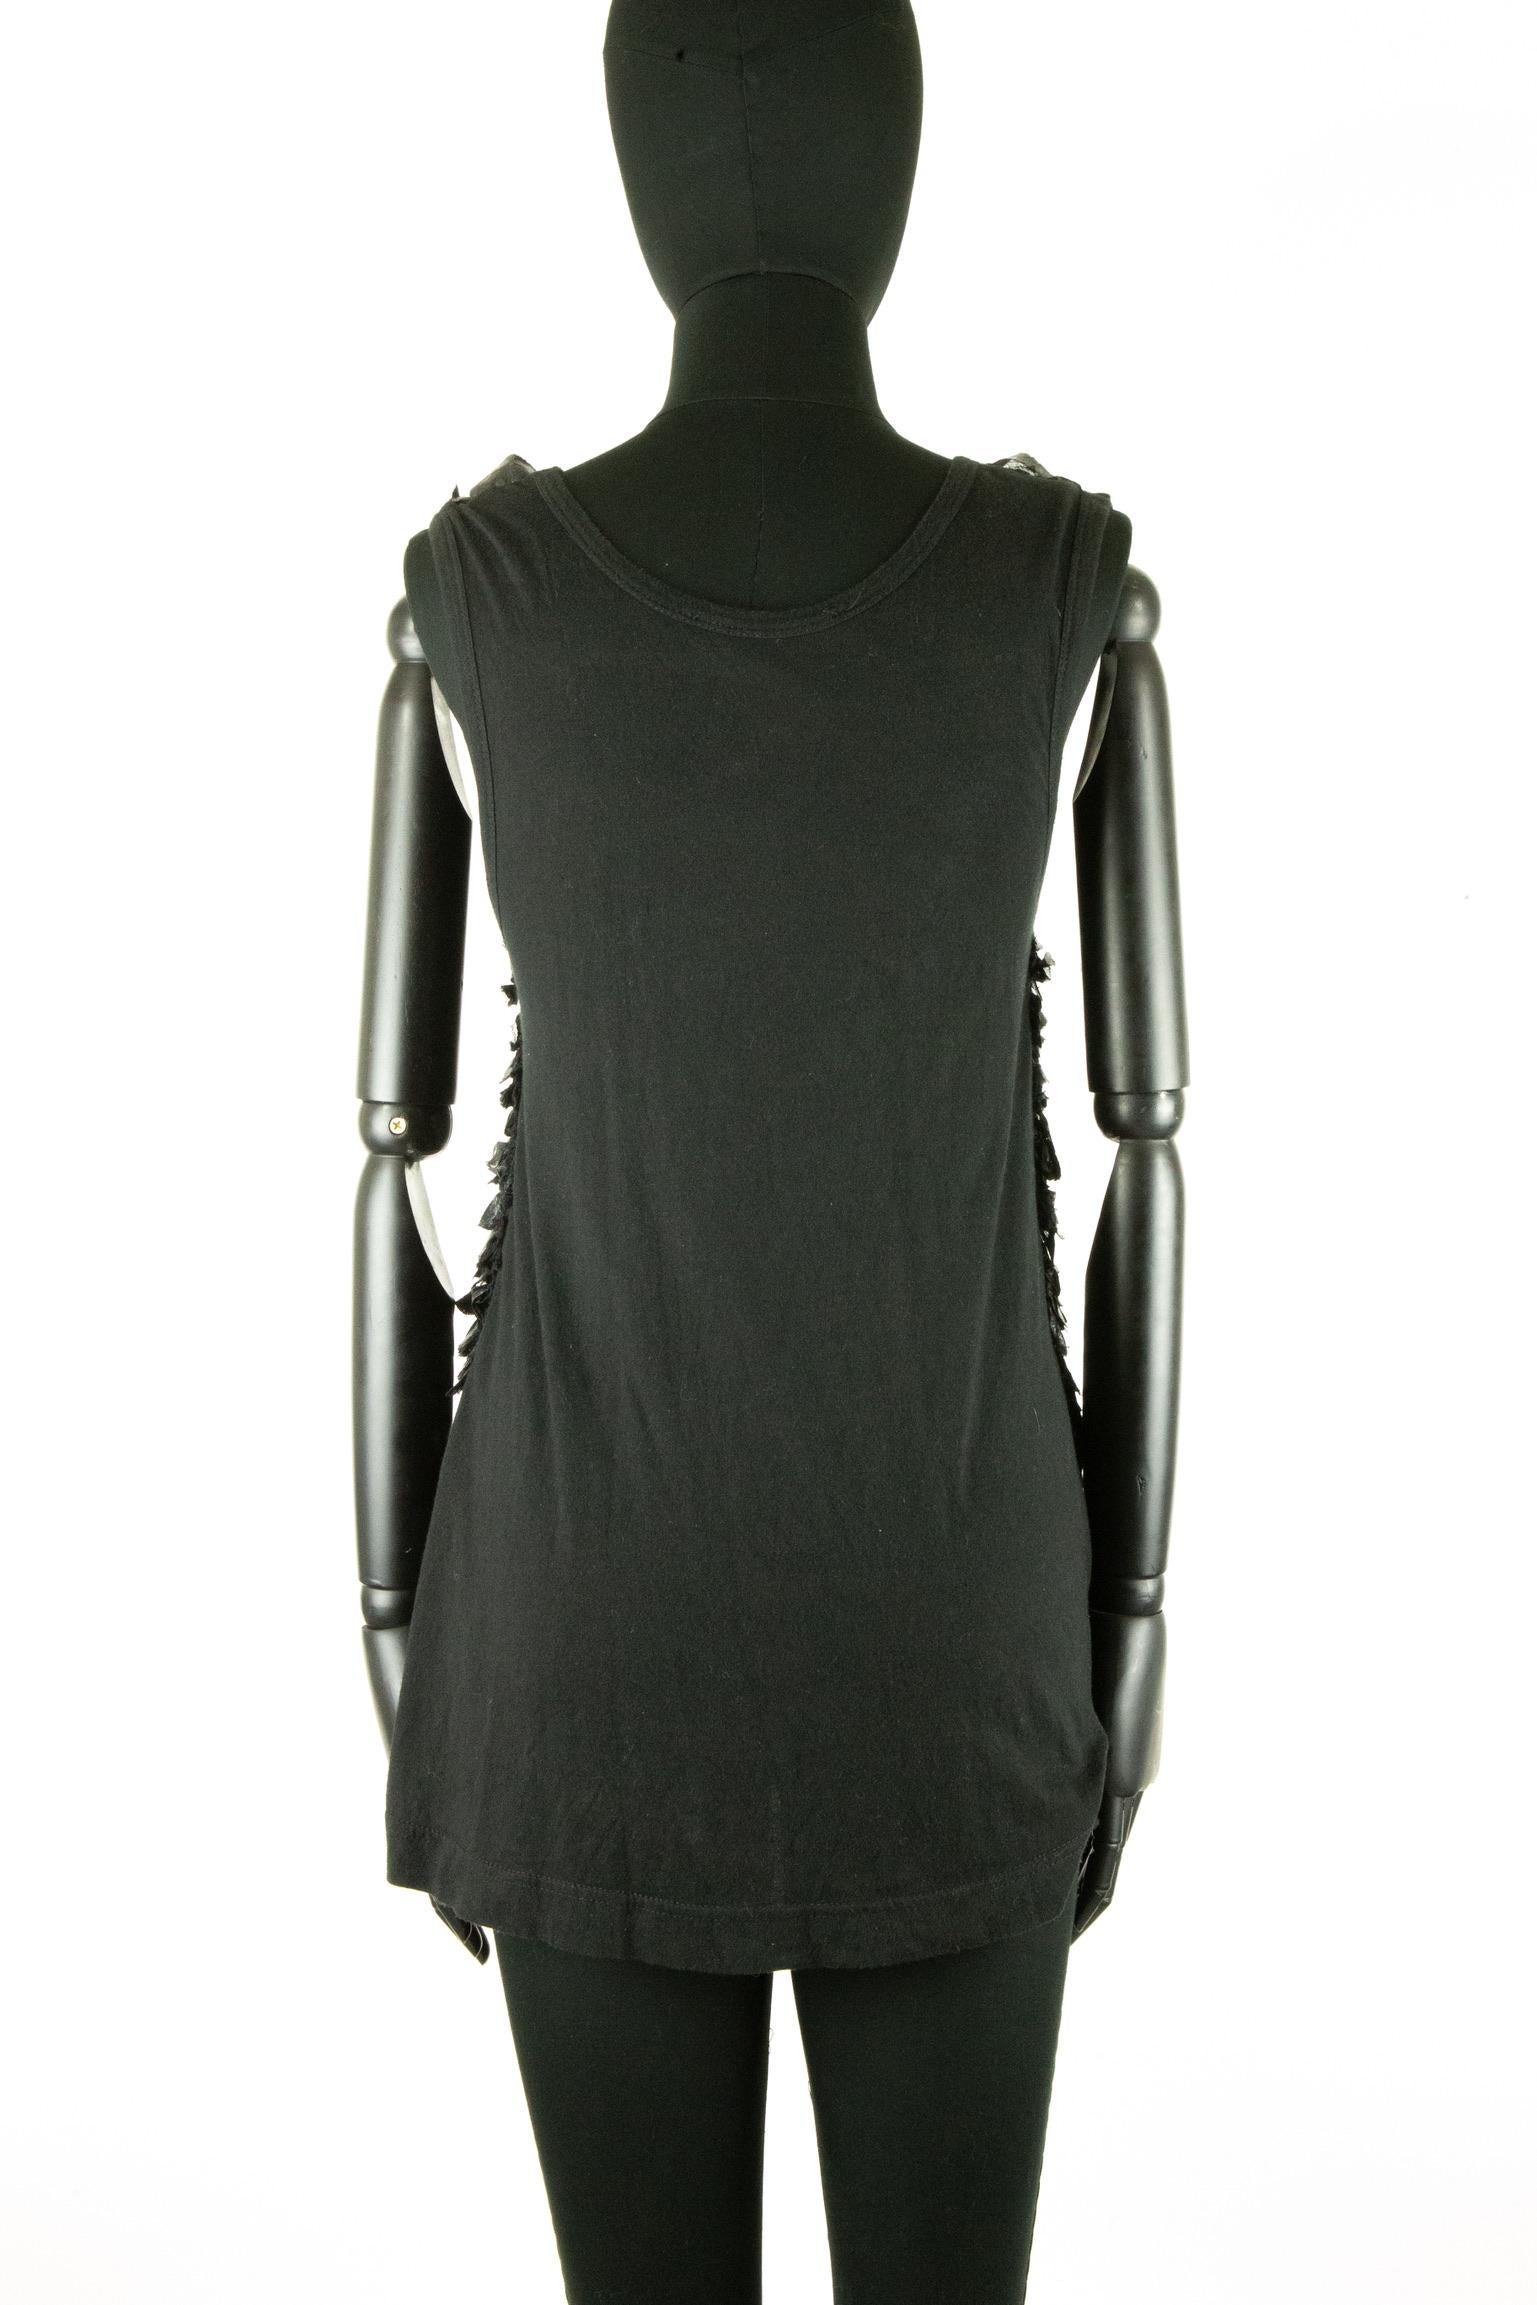 Givenchy Ruffled Black Tank In Good Condition For Sale In London, GB